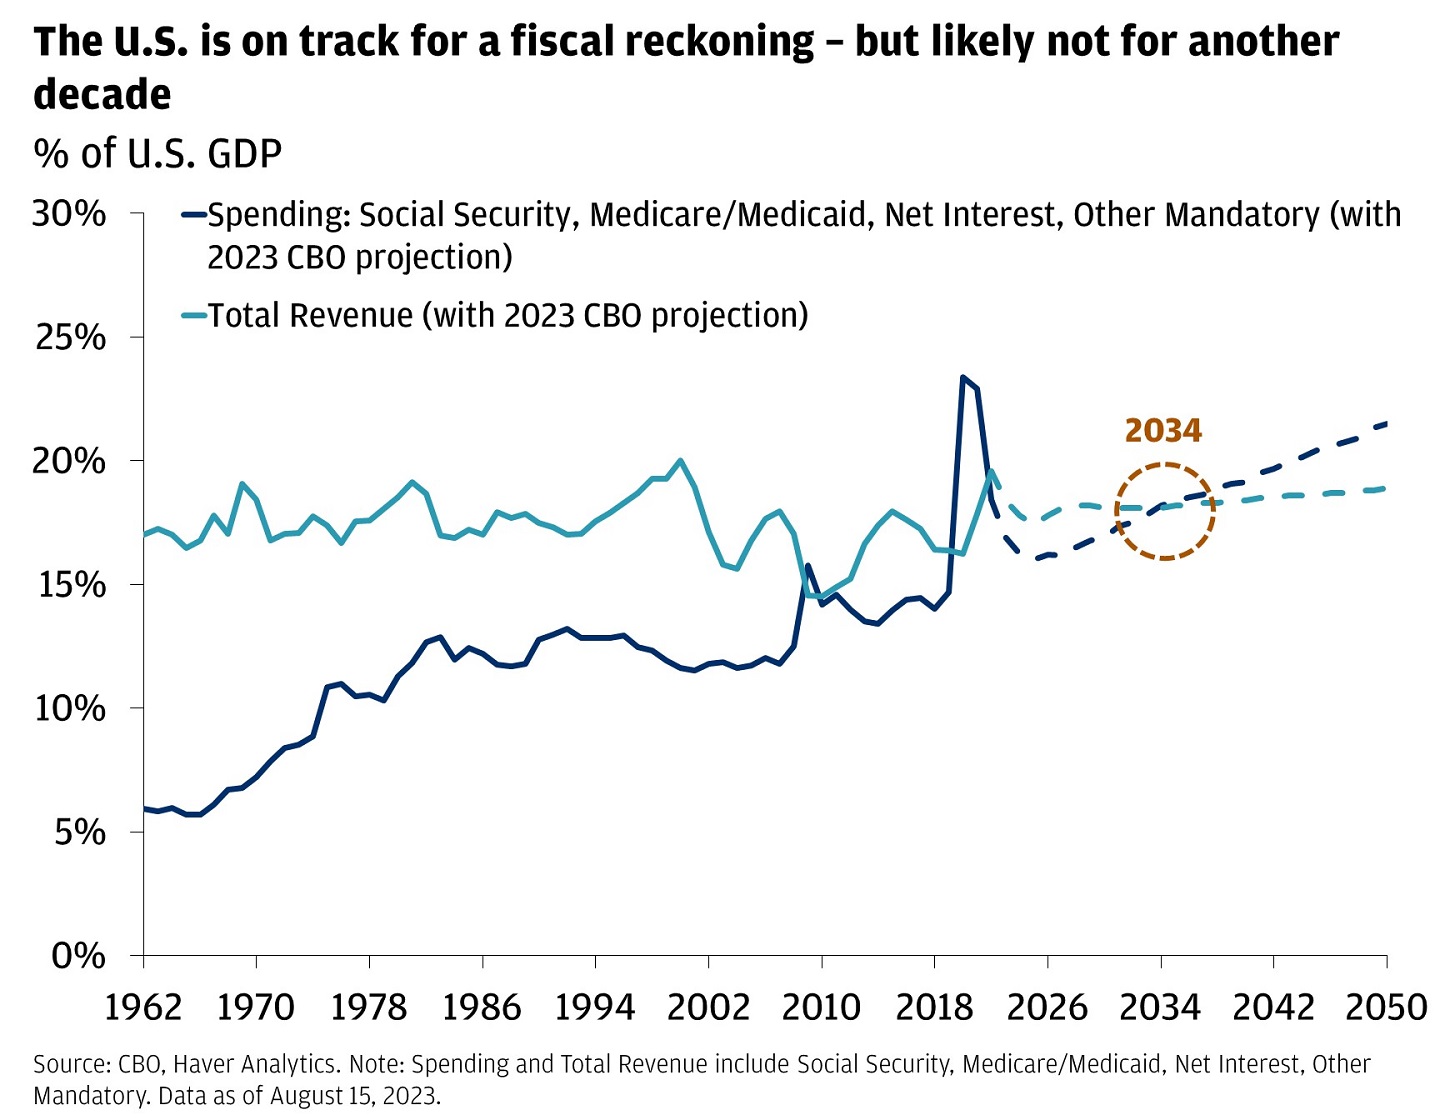 The chart shows the percentage of U.S. GDP on mandatory spending and total revenues